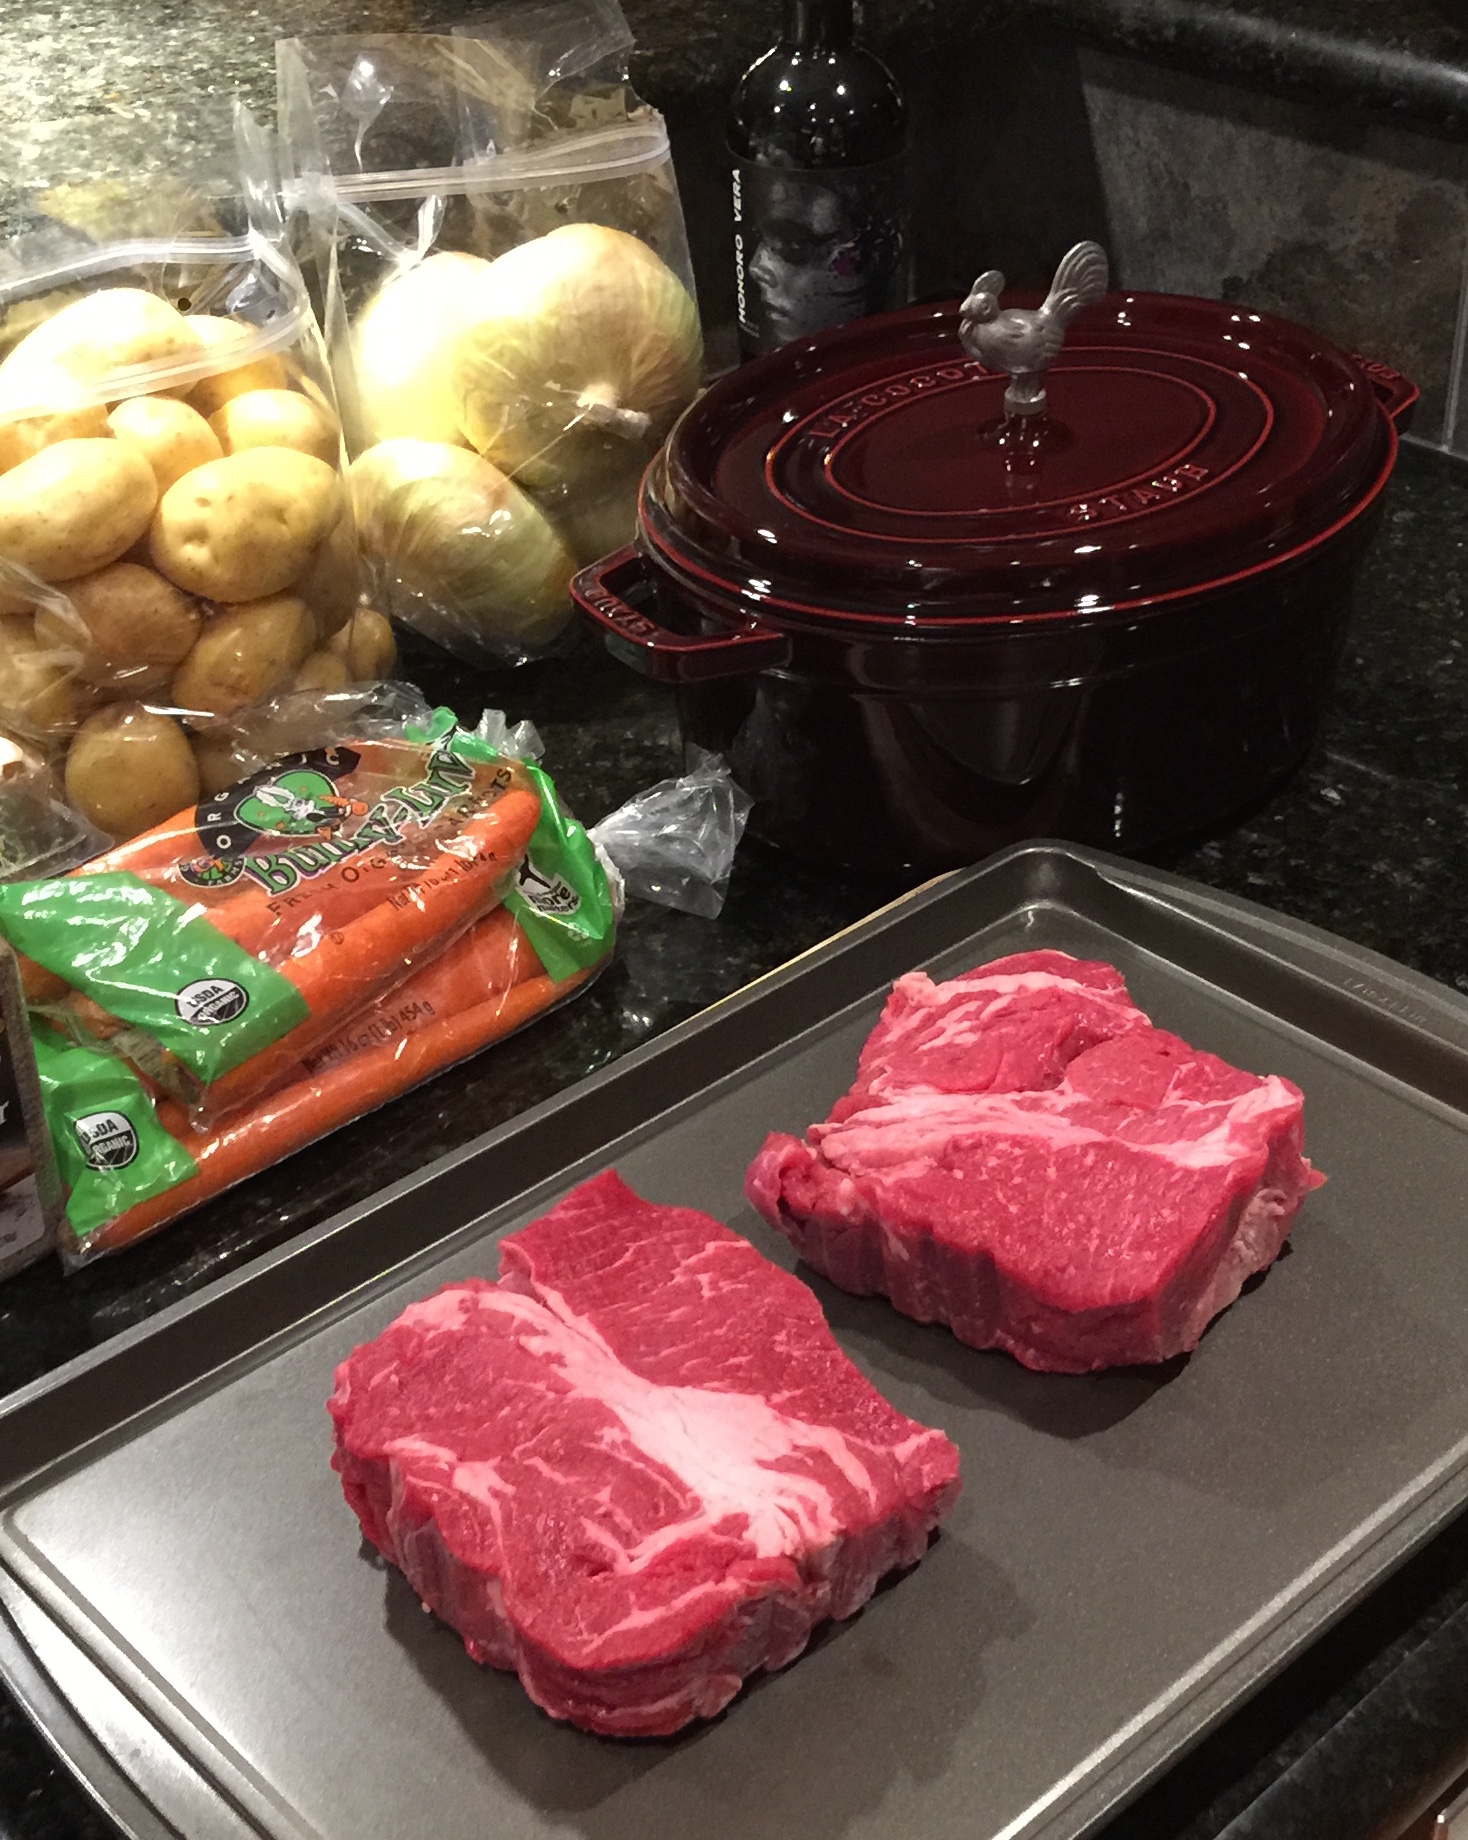 Red Wine Pot Roast with Vegetables and Butter Reduction Sauce Ingredients